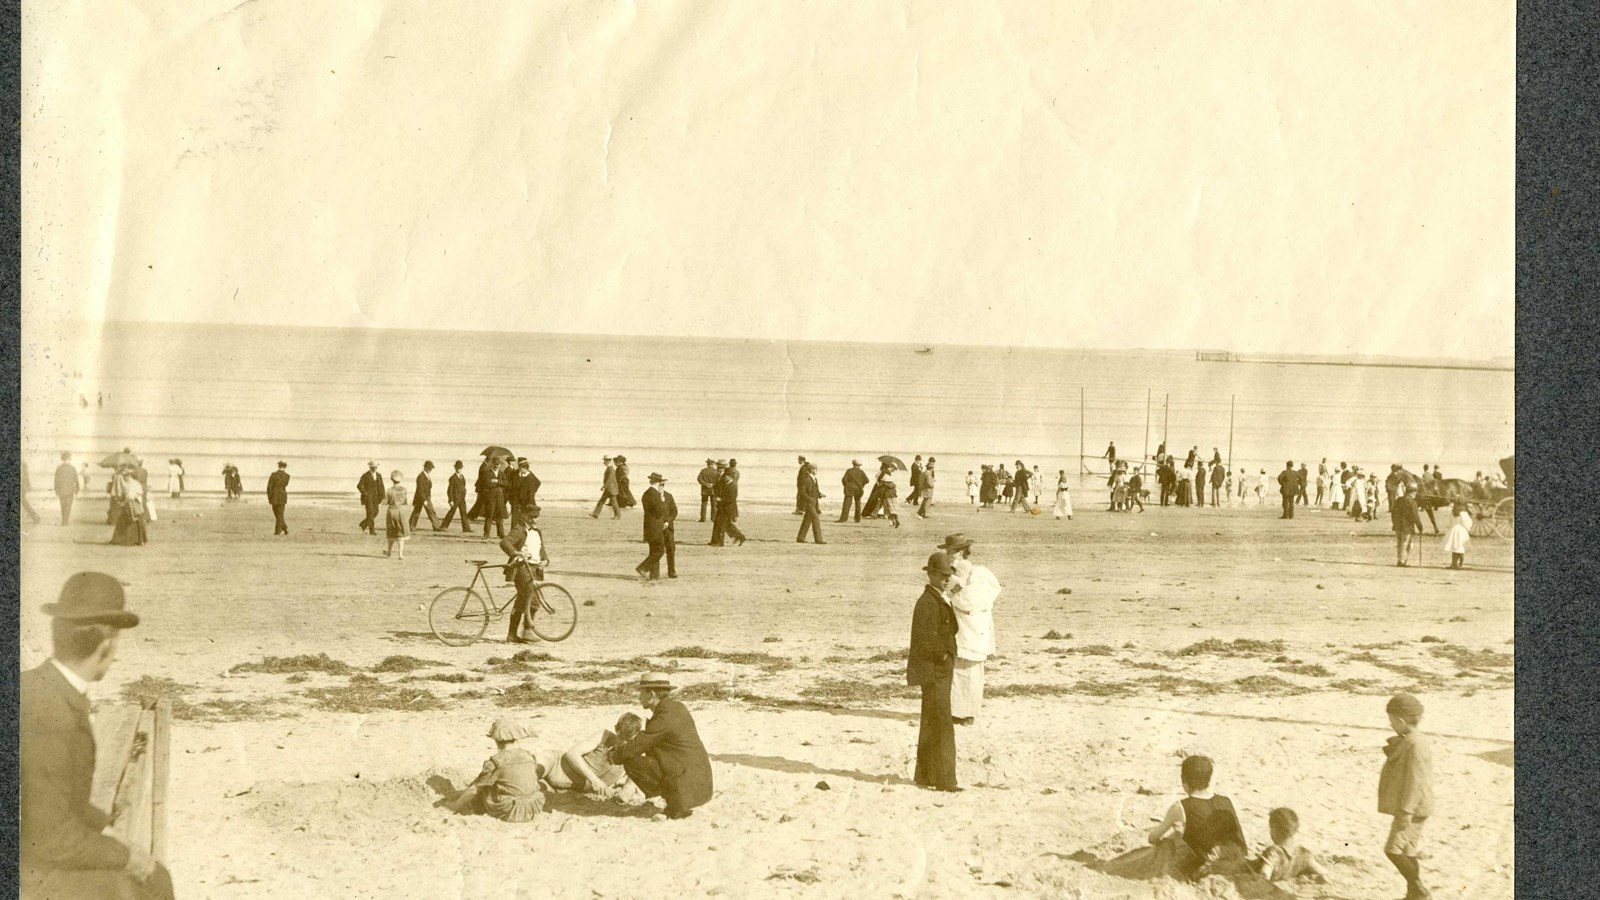 Black and white of sandy area in front of water filled with people, lots wearing suits